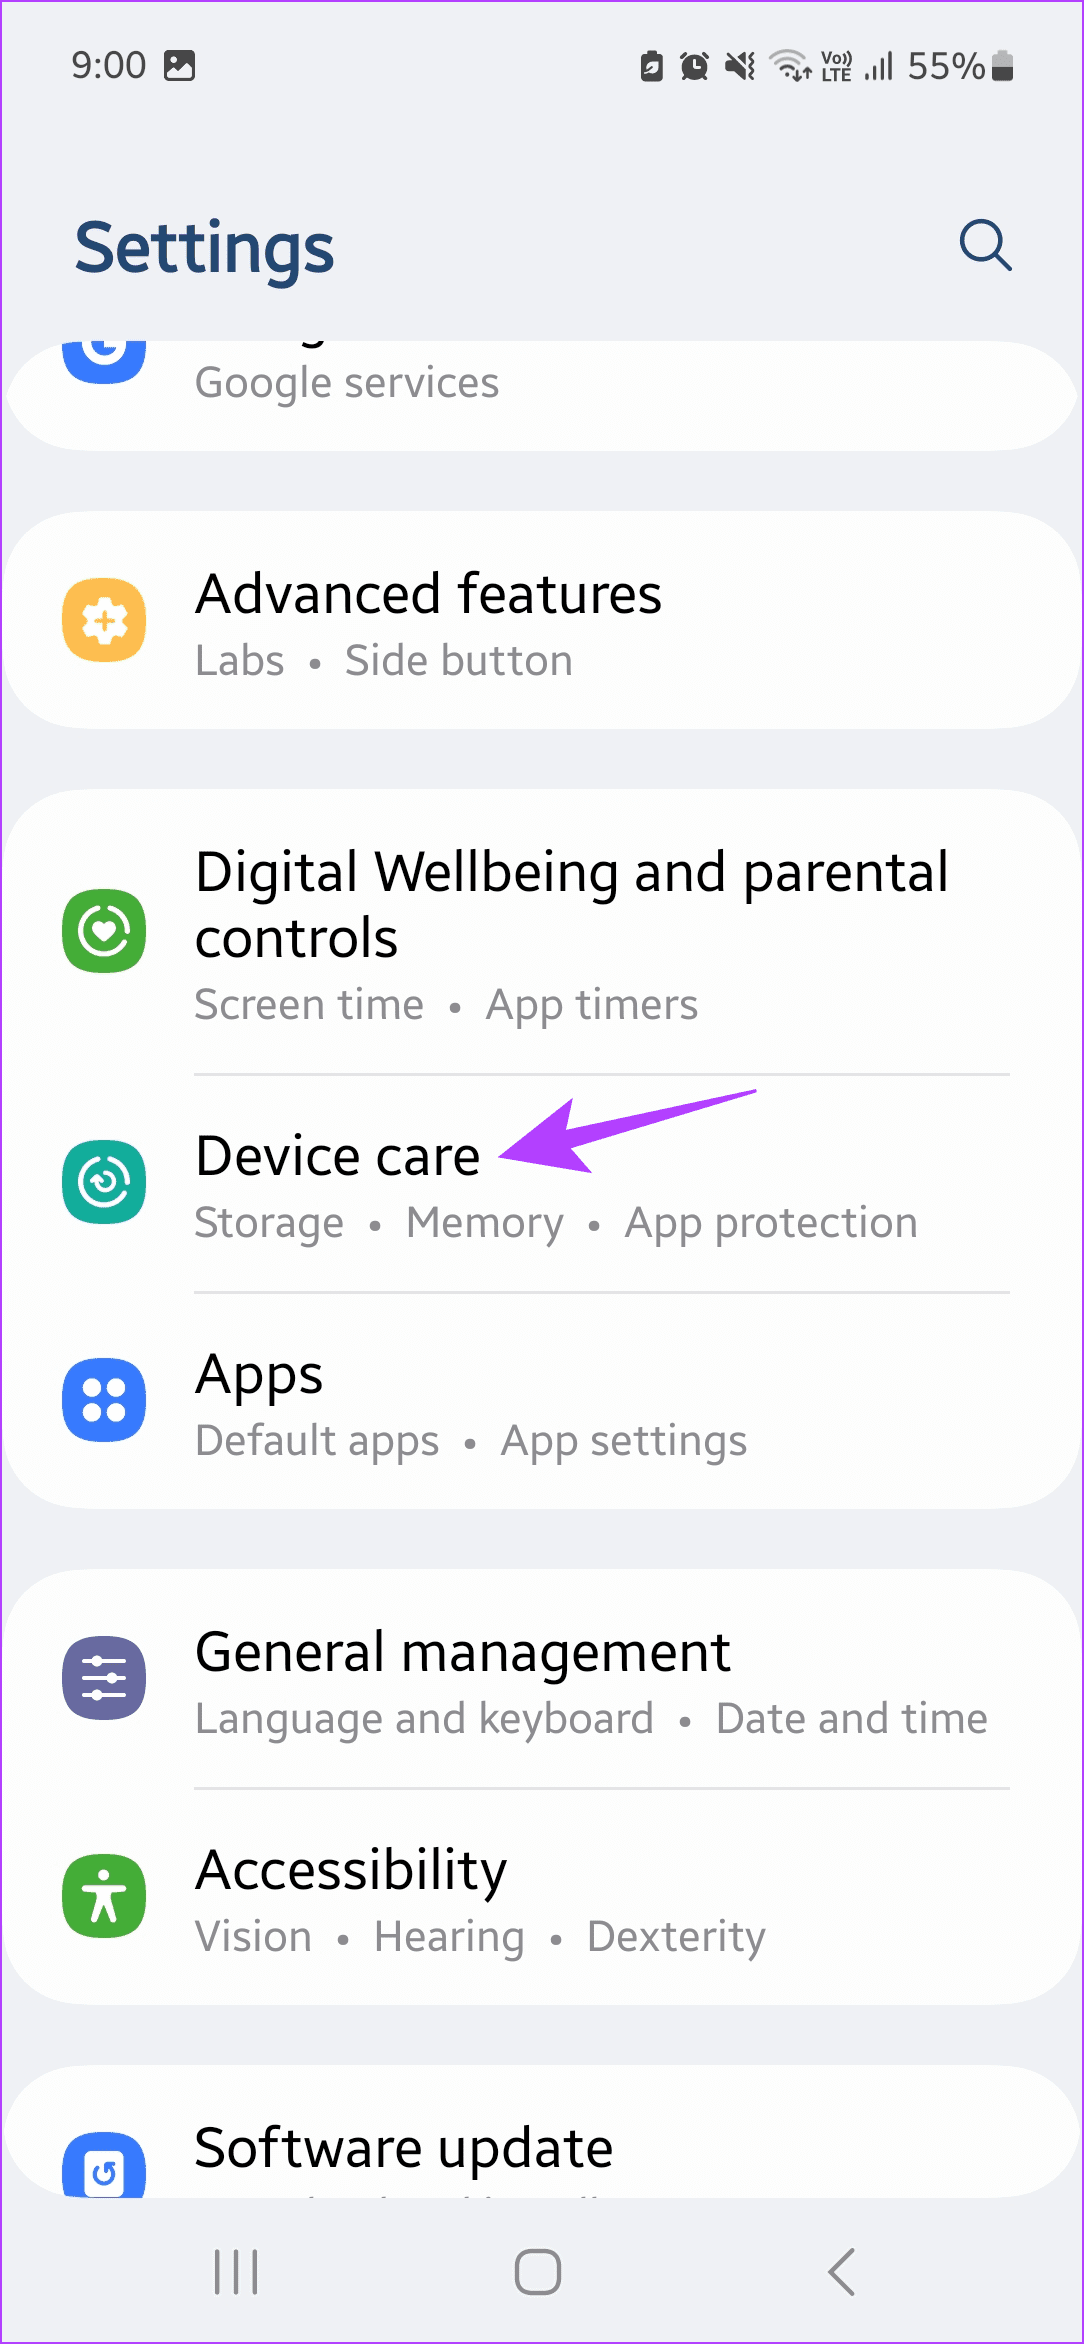 Tap on Device care